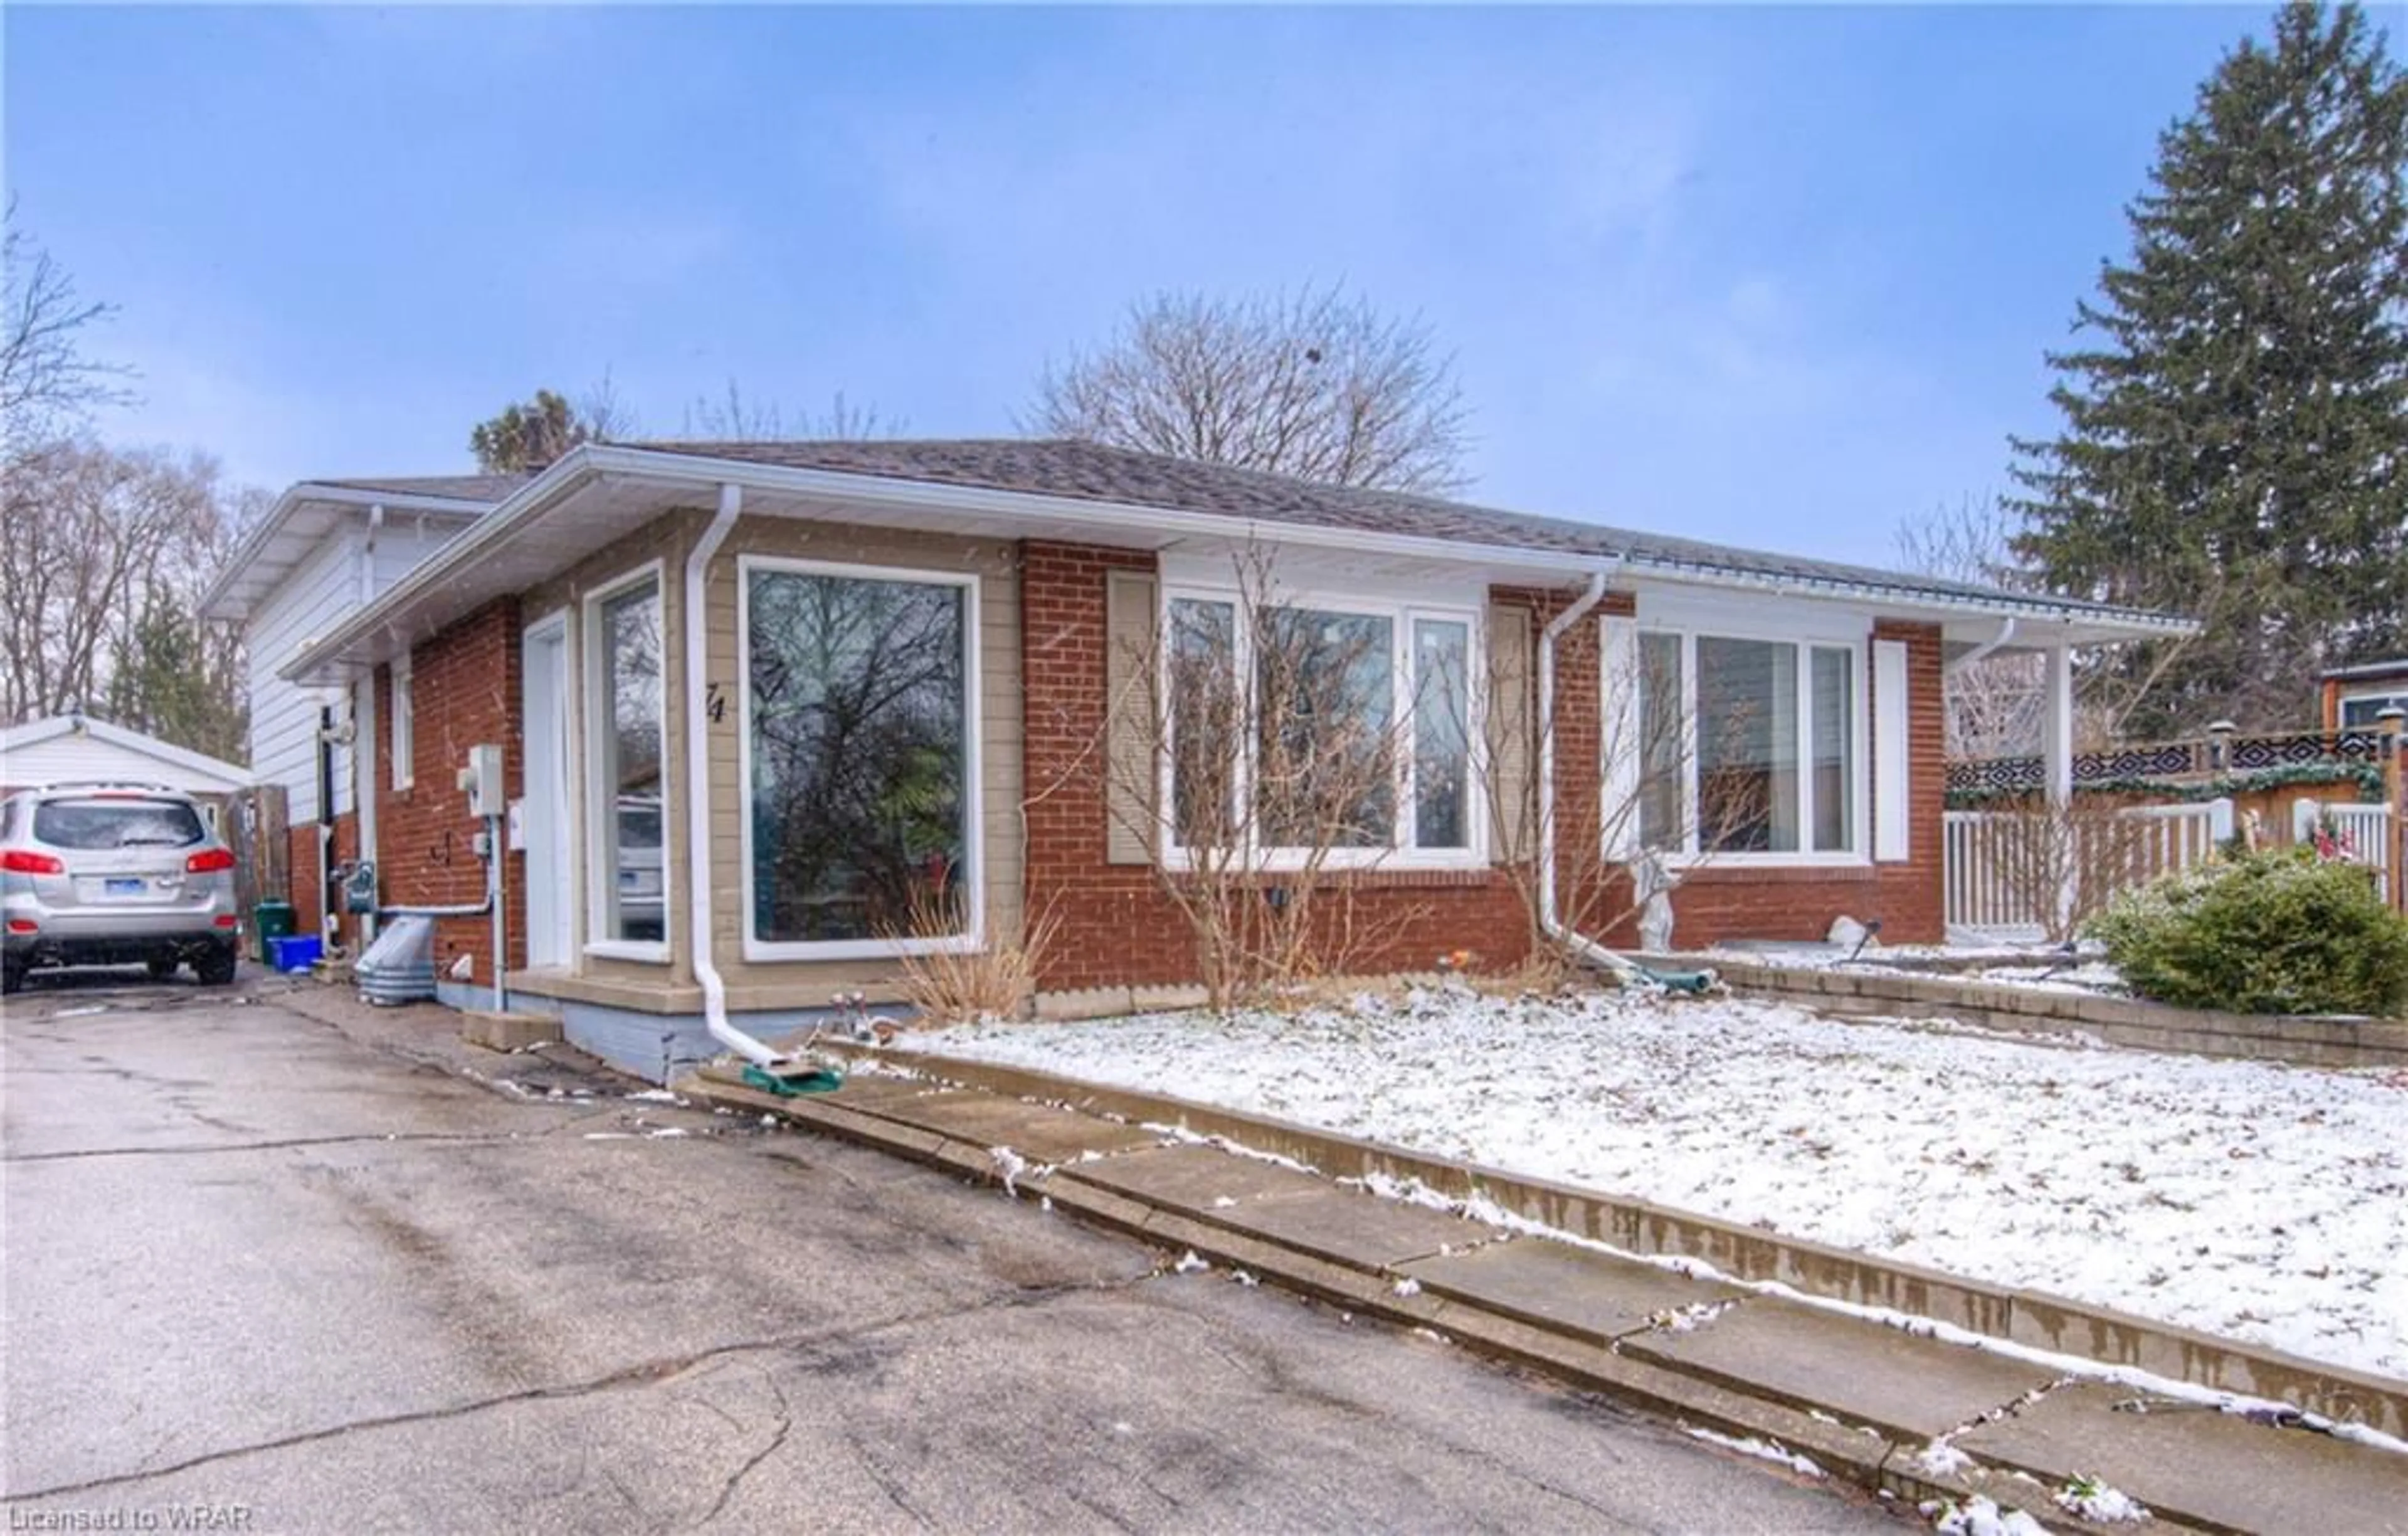 Home with brick exterior material for 74 Markwood Dr, Kitchener Ontario N2M 3H6